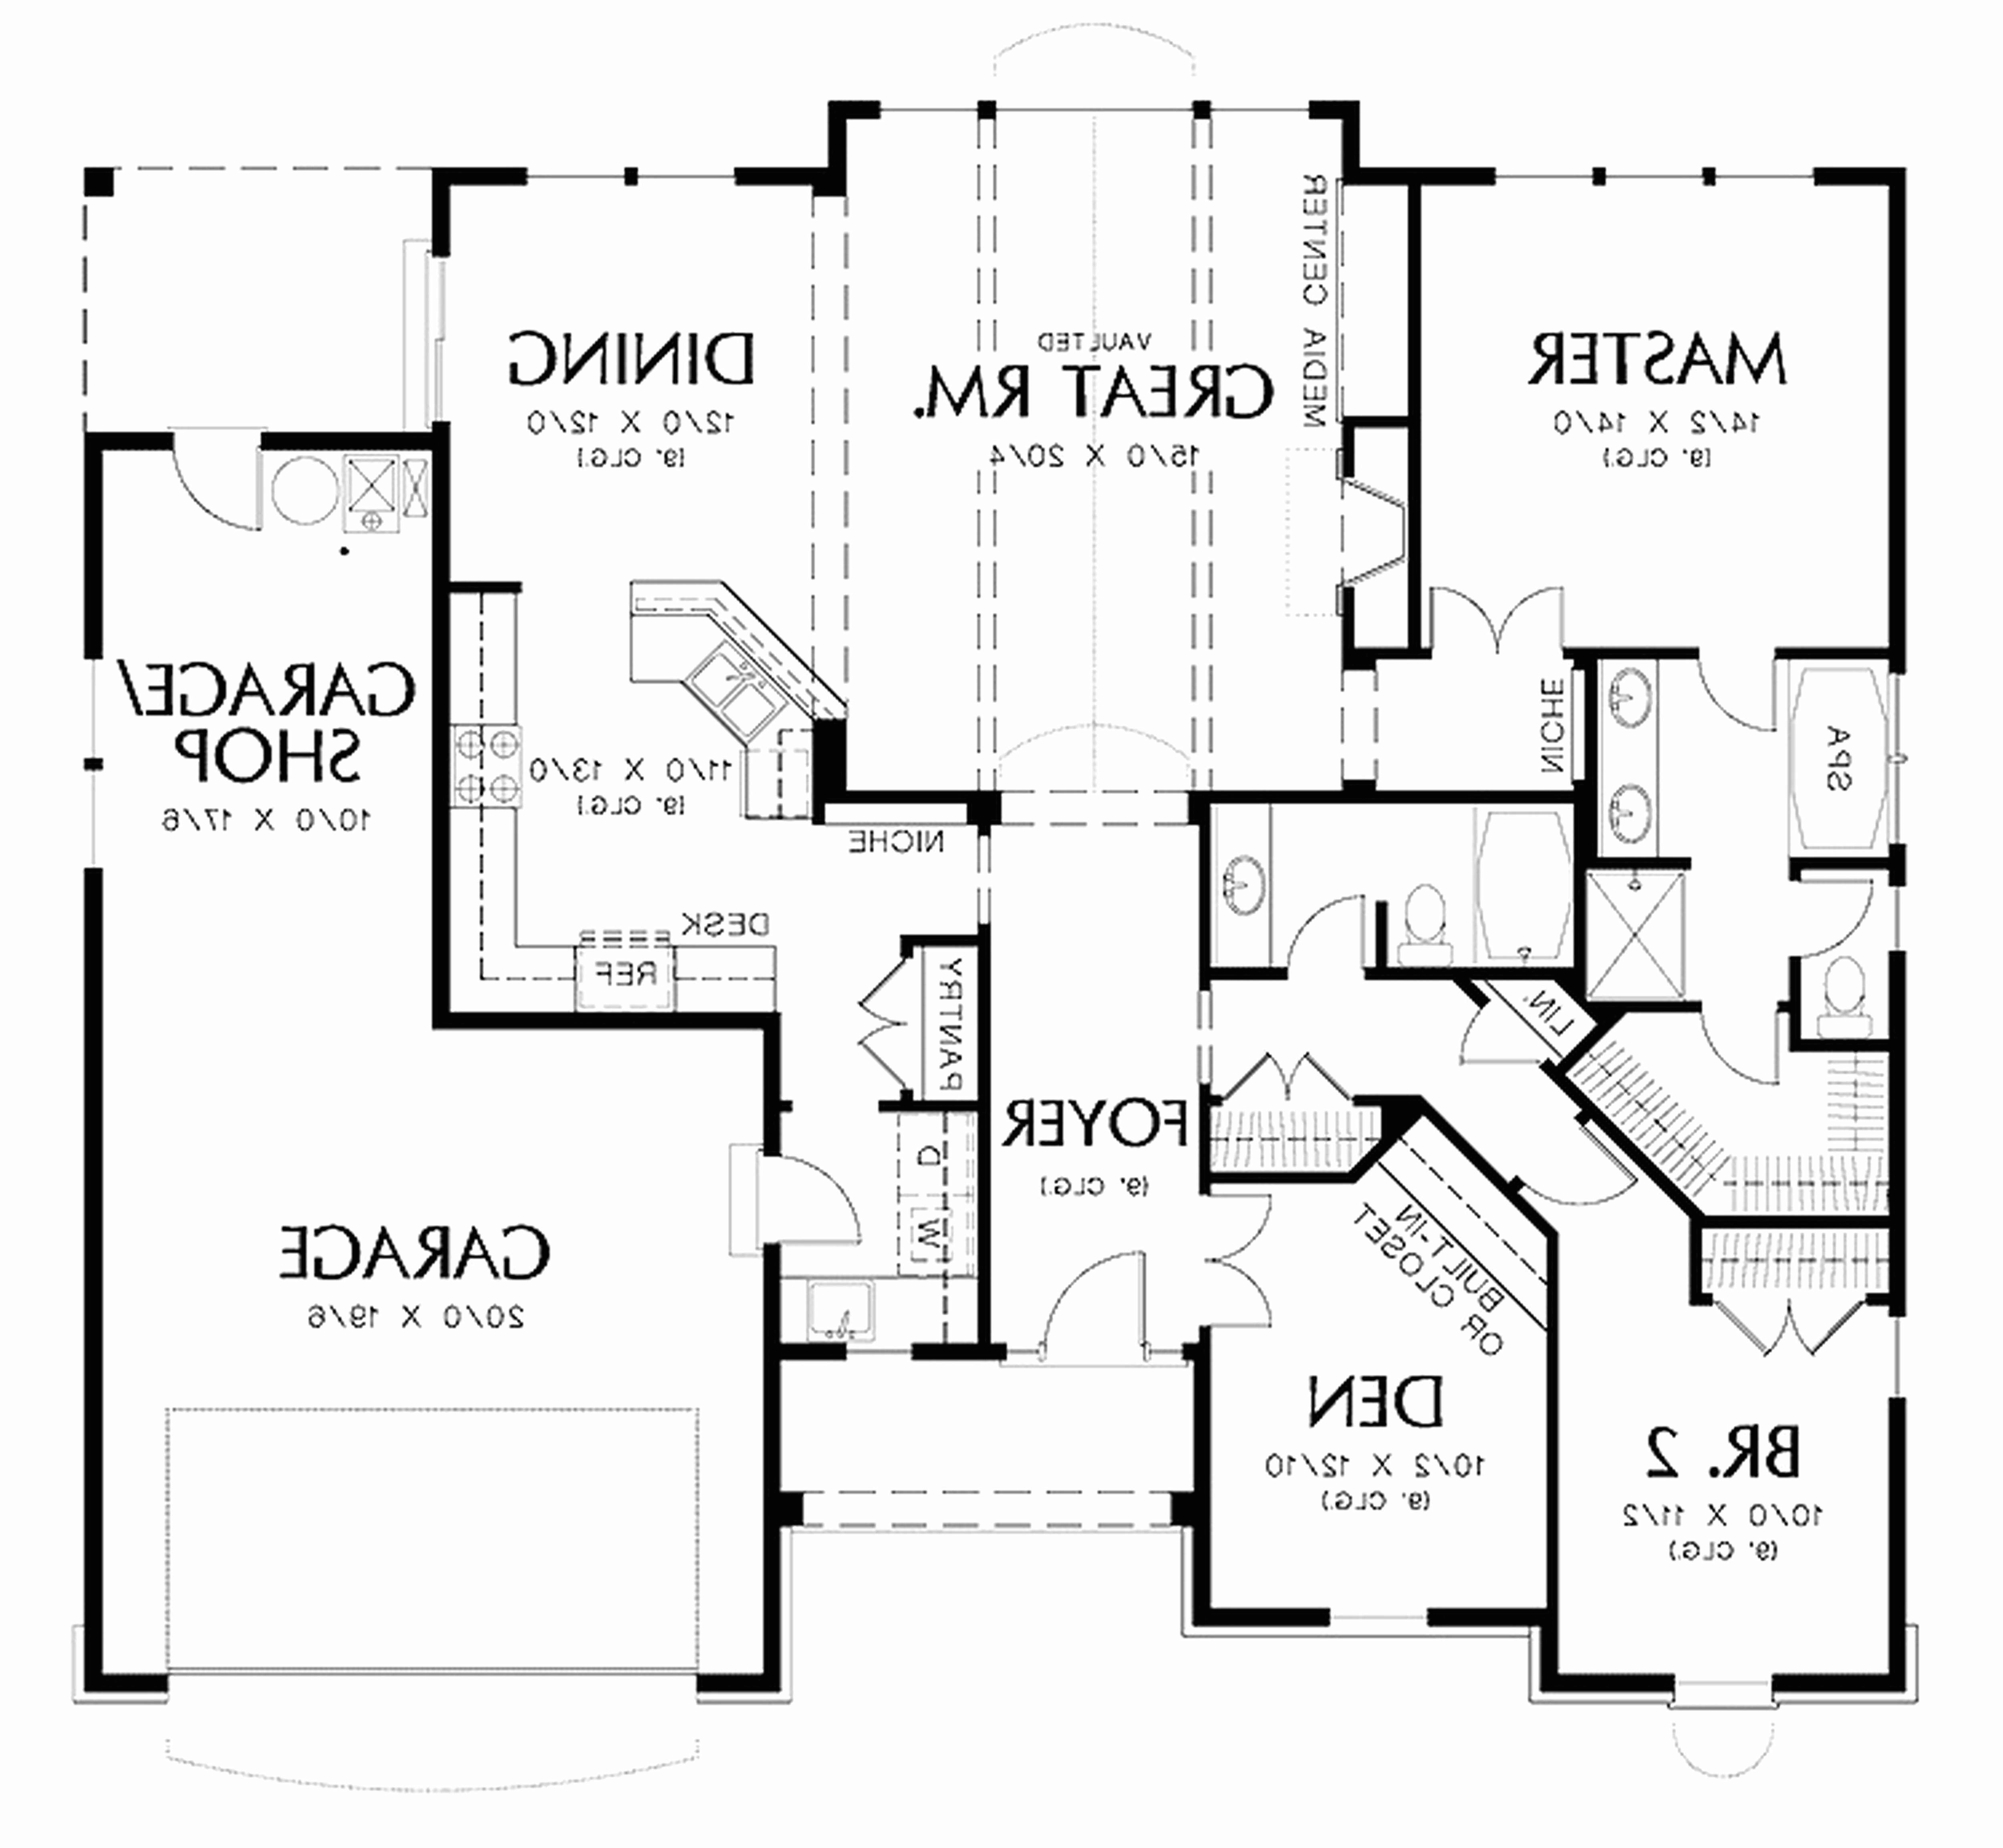 house sketch plan inspirational house sketch plan awesome fresh floor plan generator home planner 0d